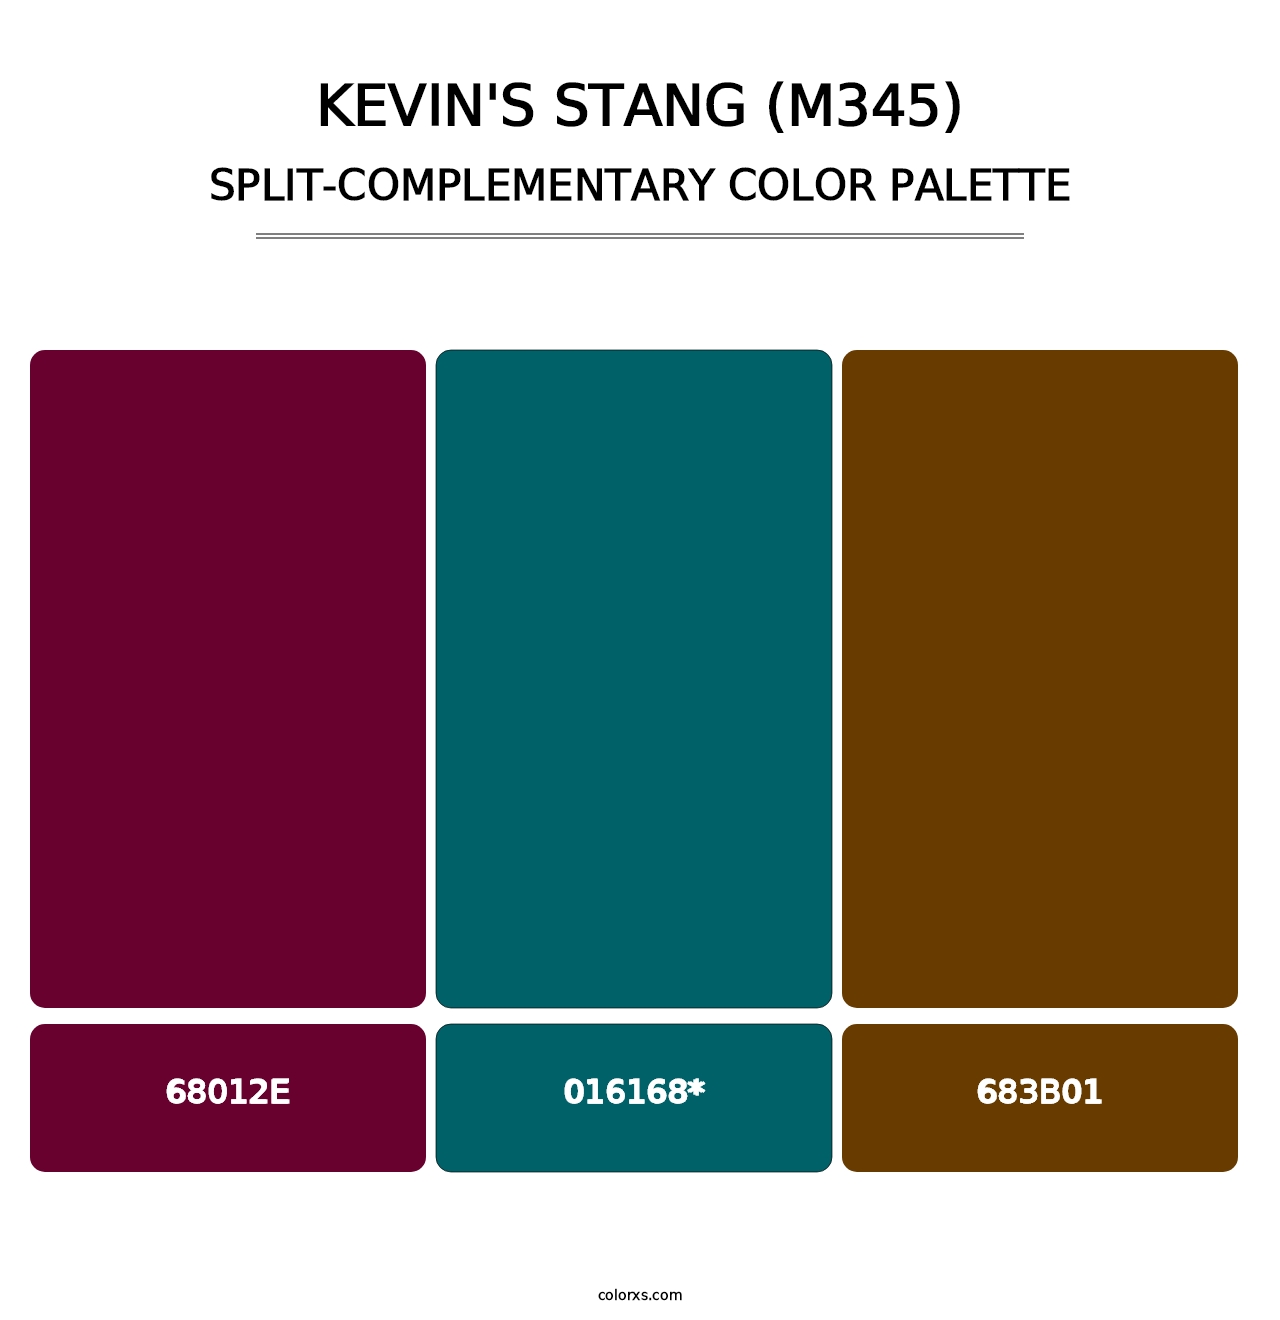 Kevin's Stang (M345) - Split-Complementary Color Palette